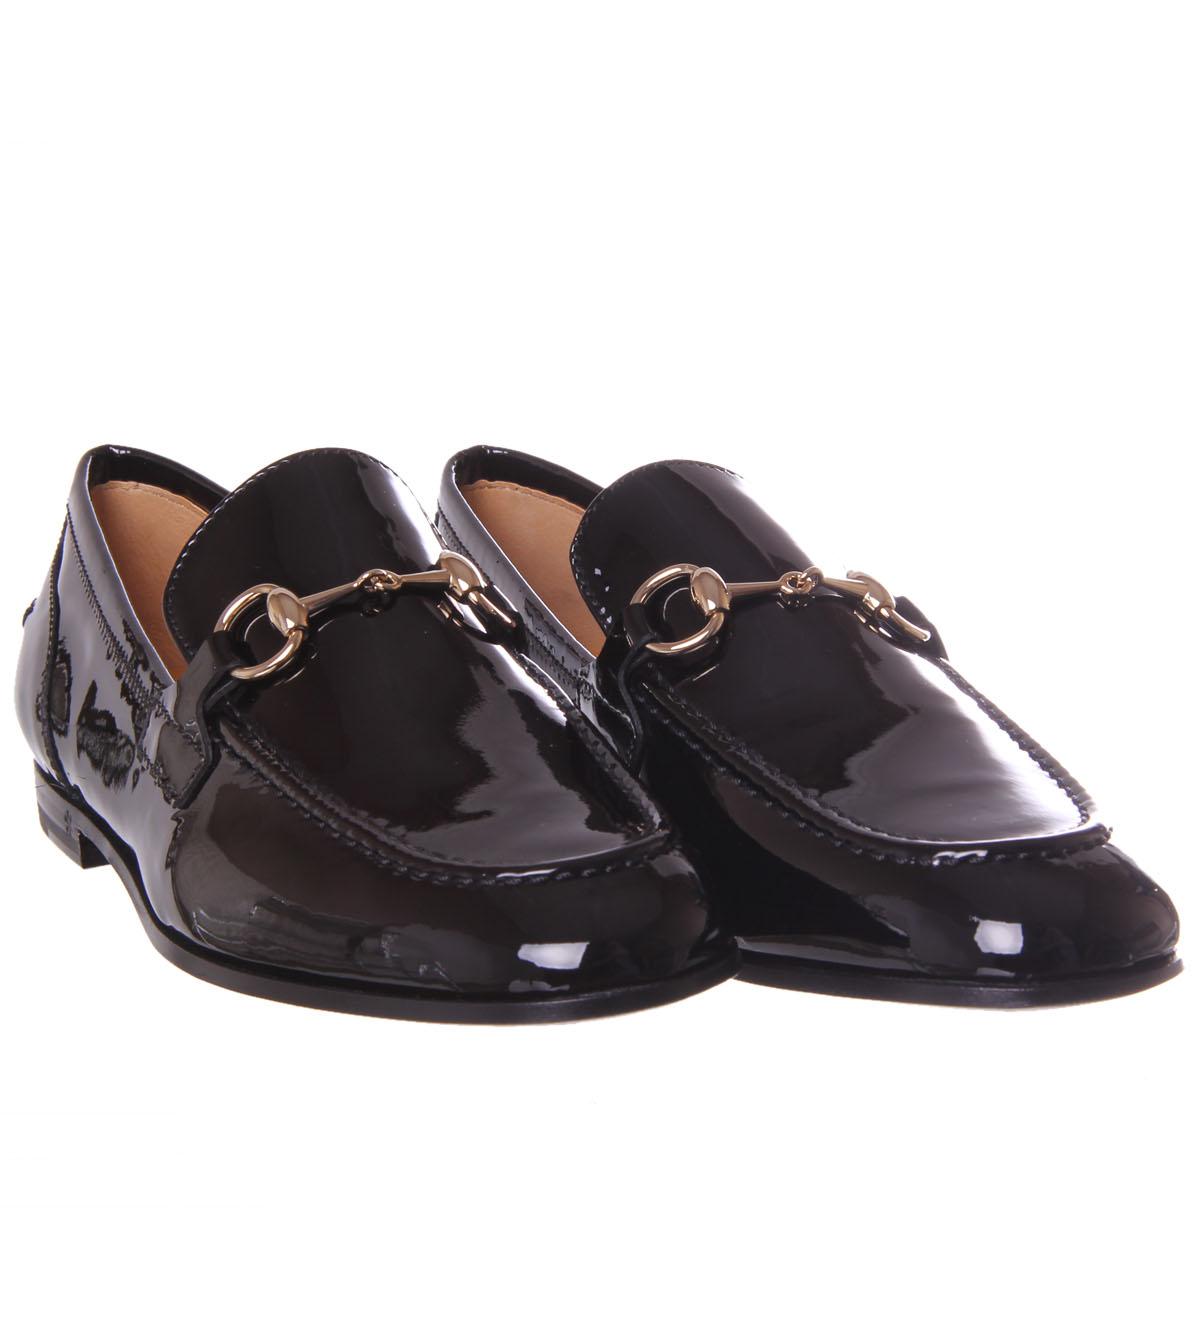 Foto Gucci Black Patent Leather Loafer